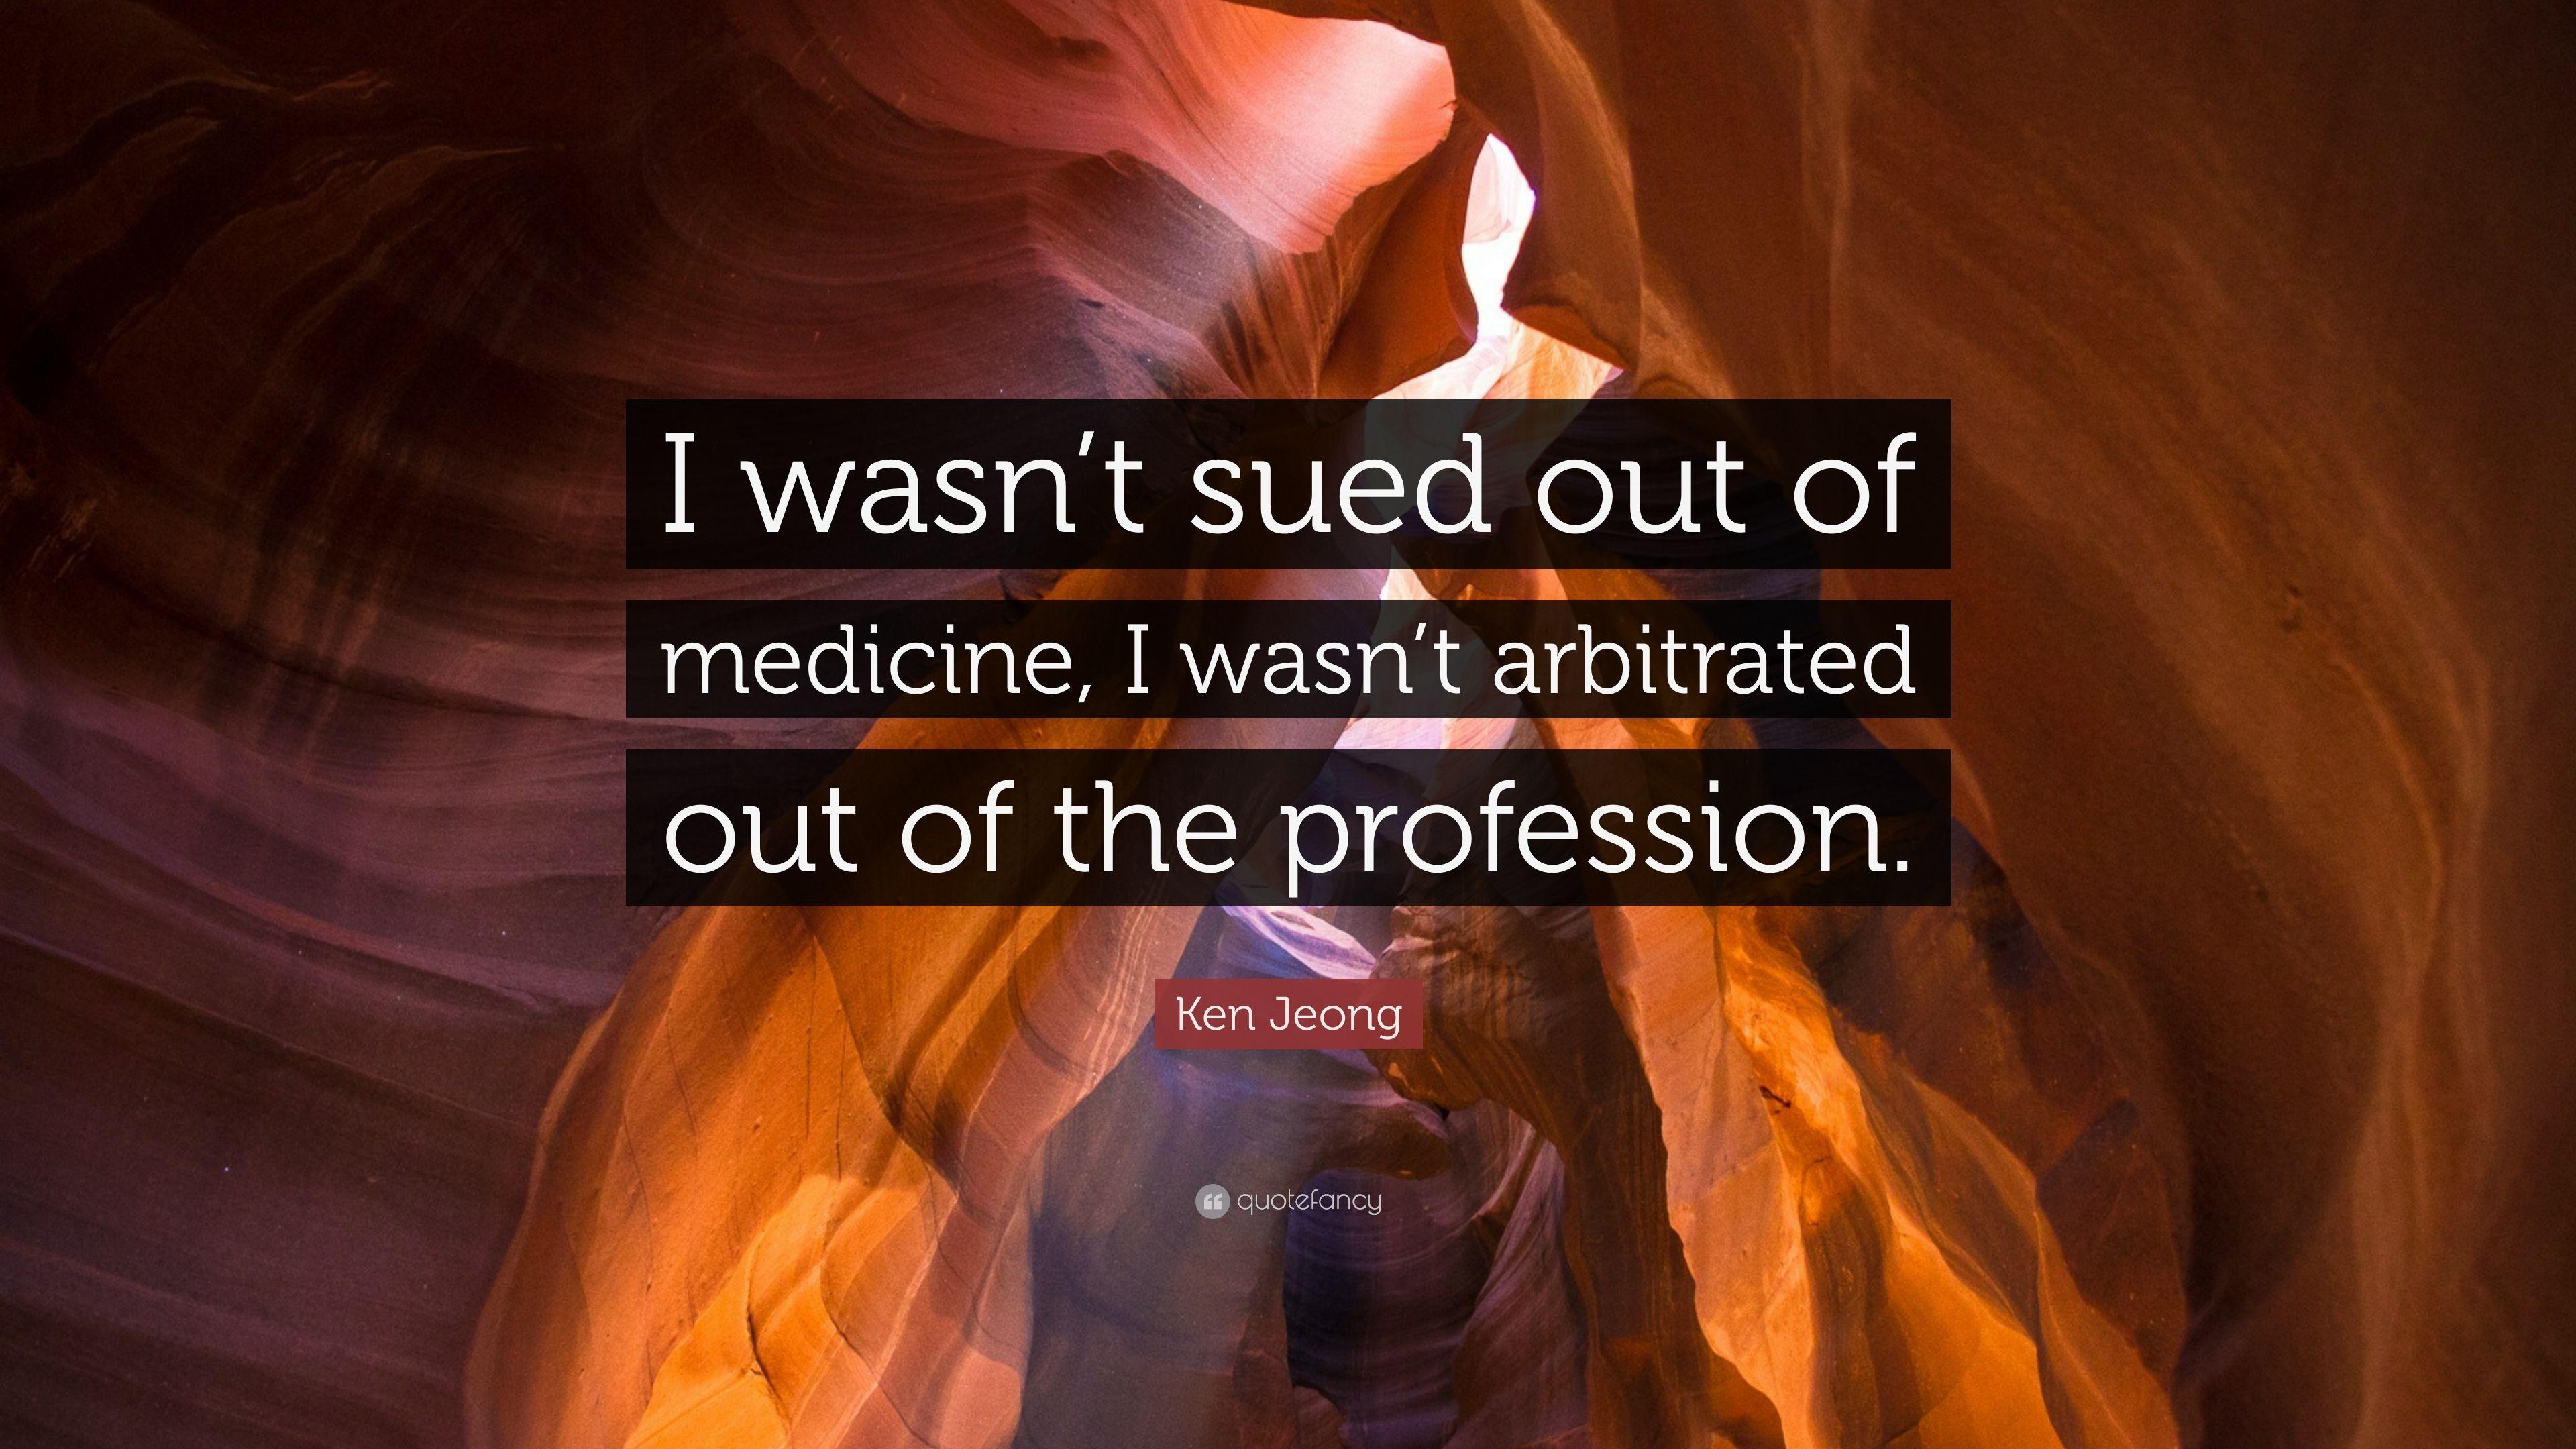 Ken Jeong Quote: “I wasn't sued out of medicine, I wasn't arbitrated